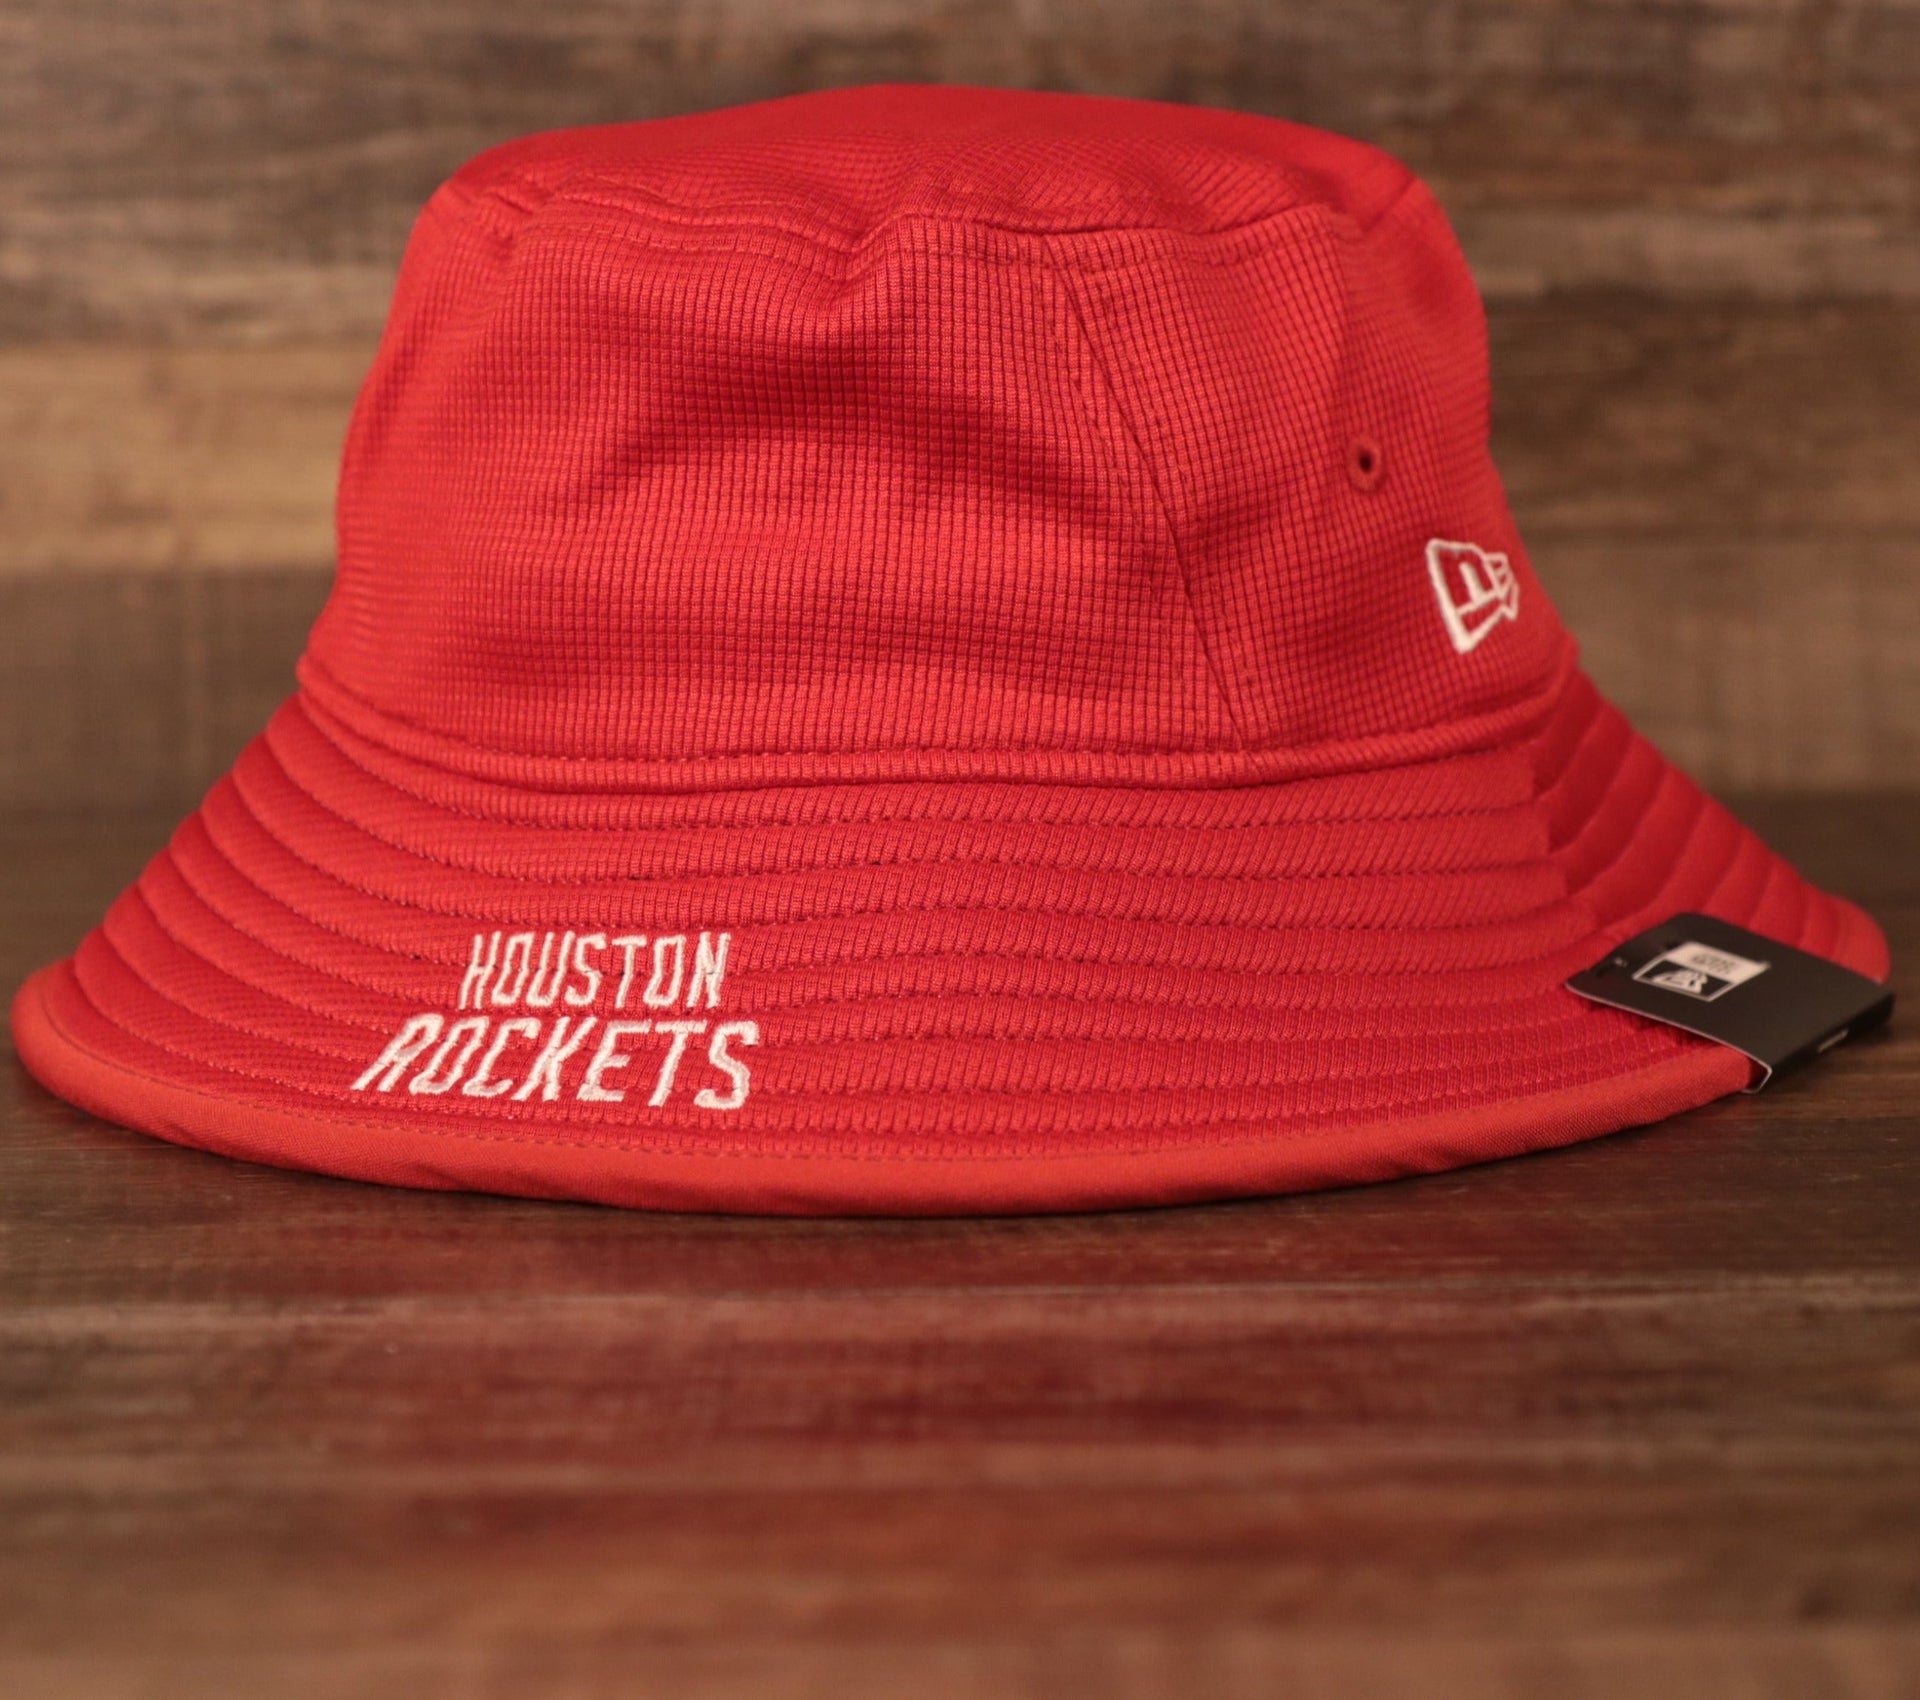 The Houston Rockets red bucket hat by New Era.